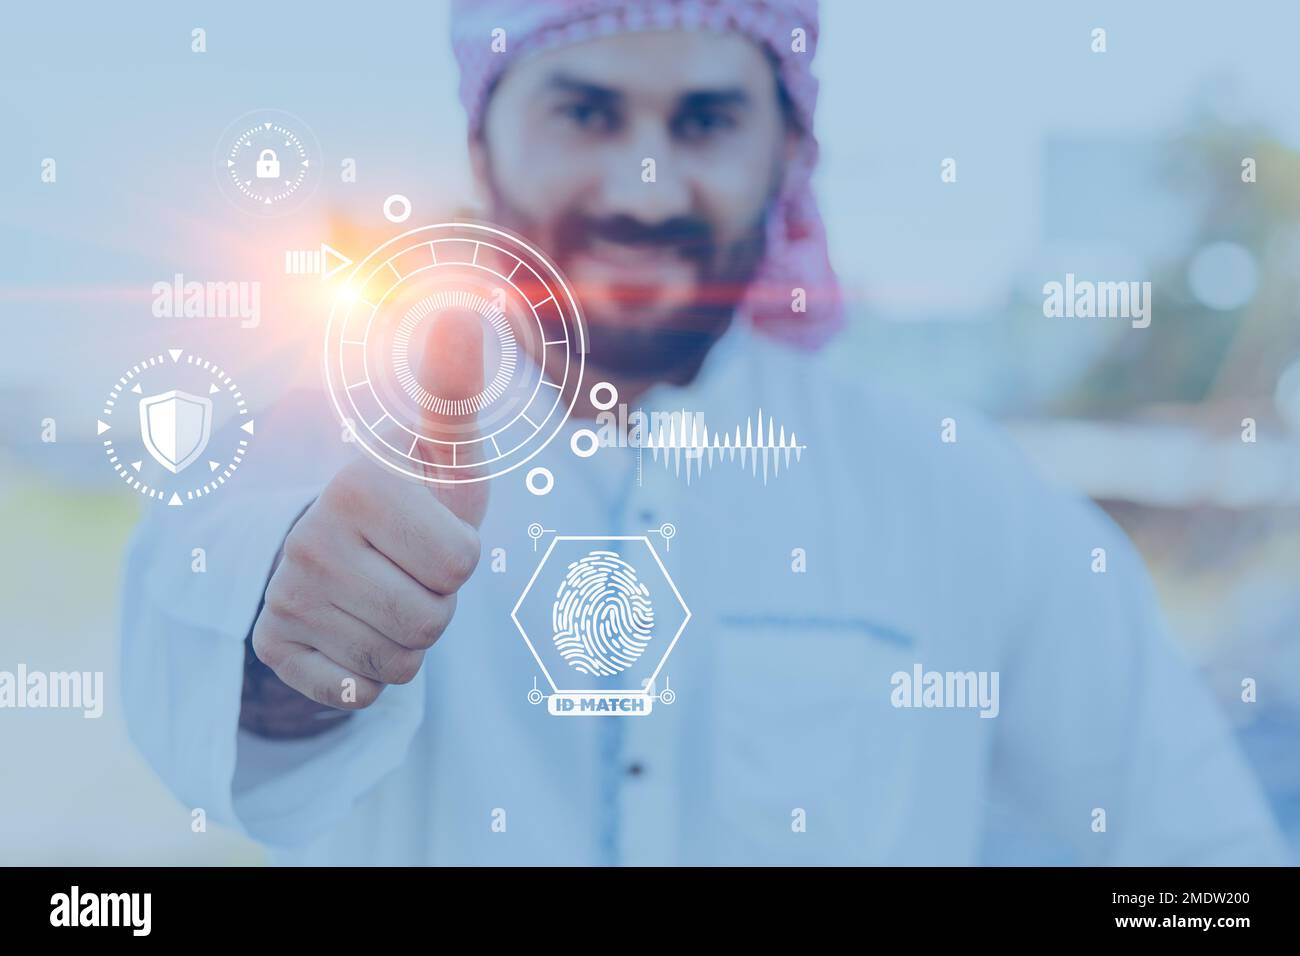 Arab male happy with finger scan technology for personal data security protection system Stock Photo